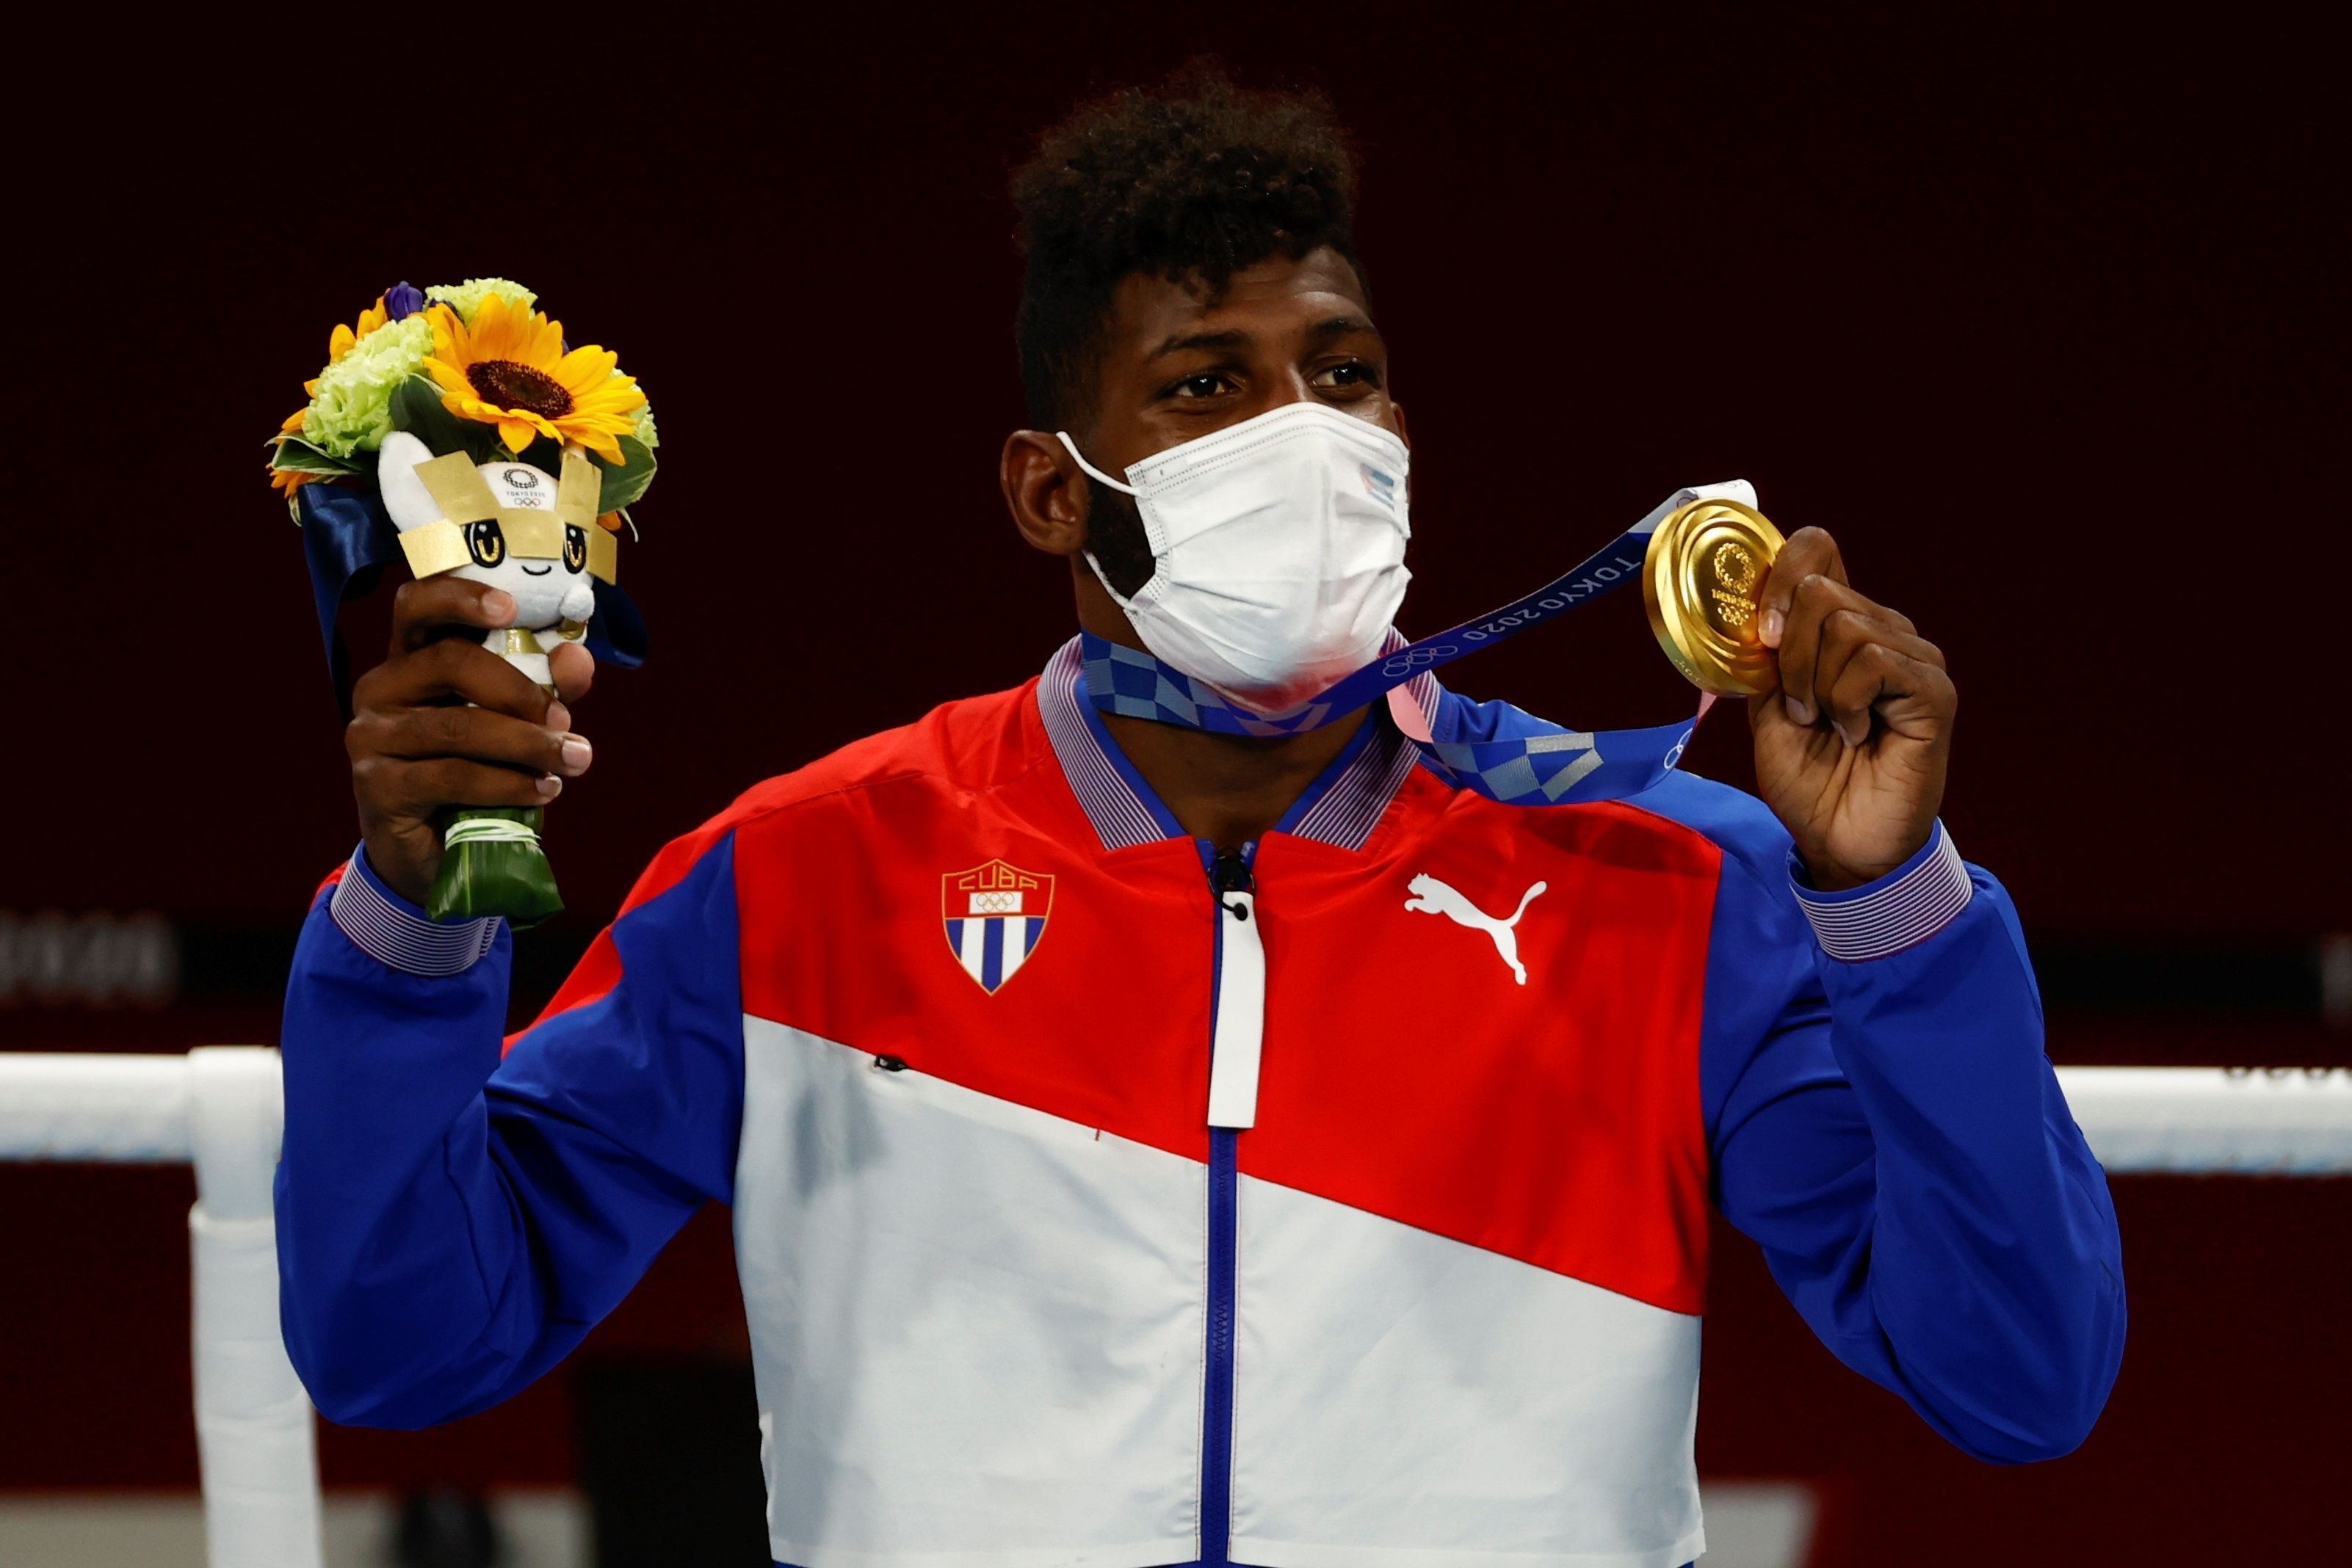 Andy Cruz from Cuba, gold medal for men's lightweight boxing at the 2020 Olympic Games. EFE/ José Méndez/File
